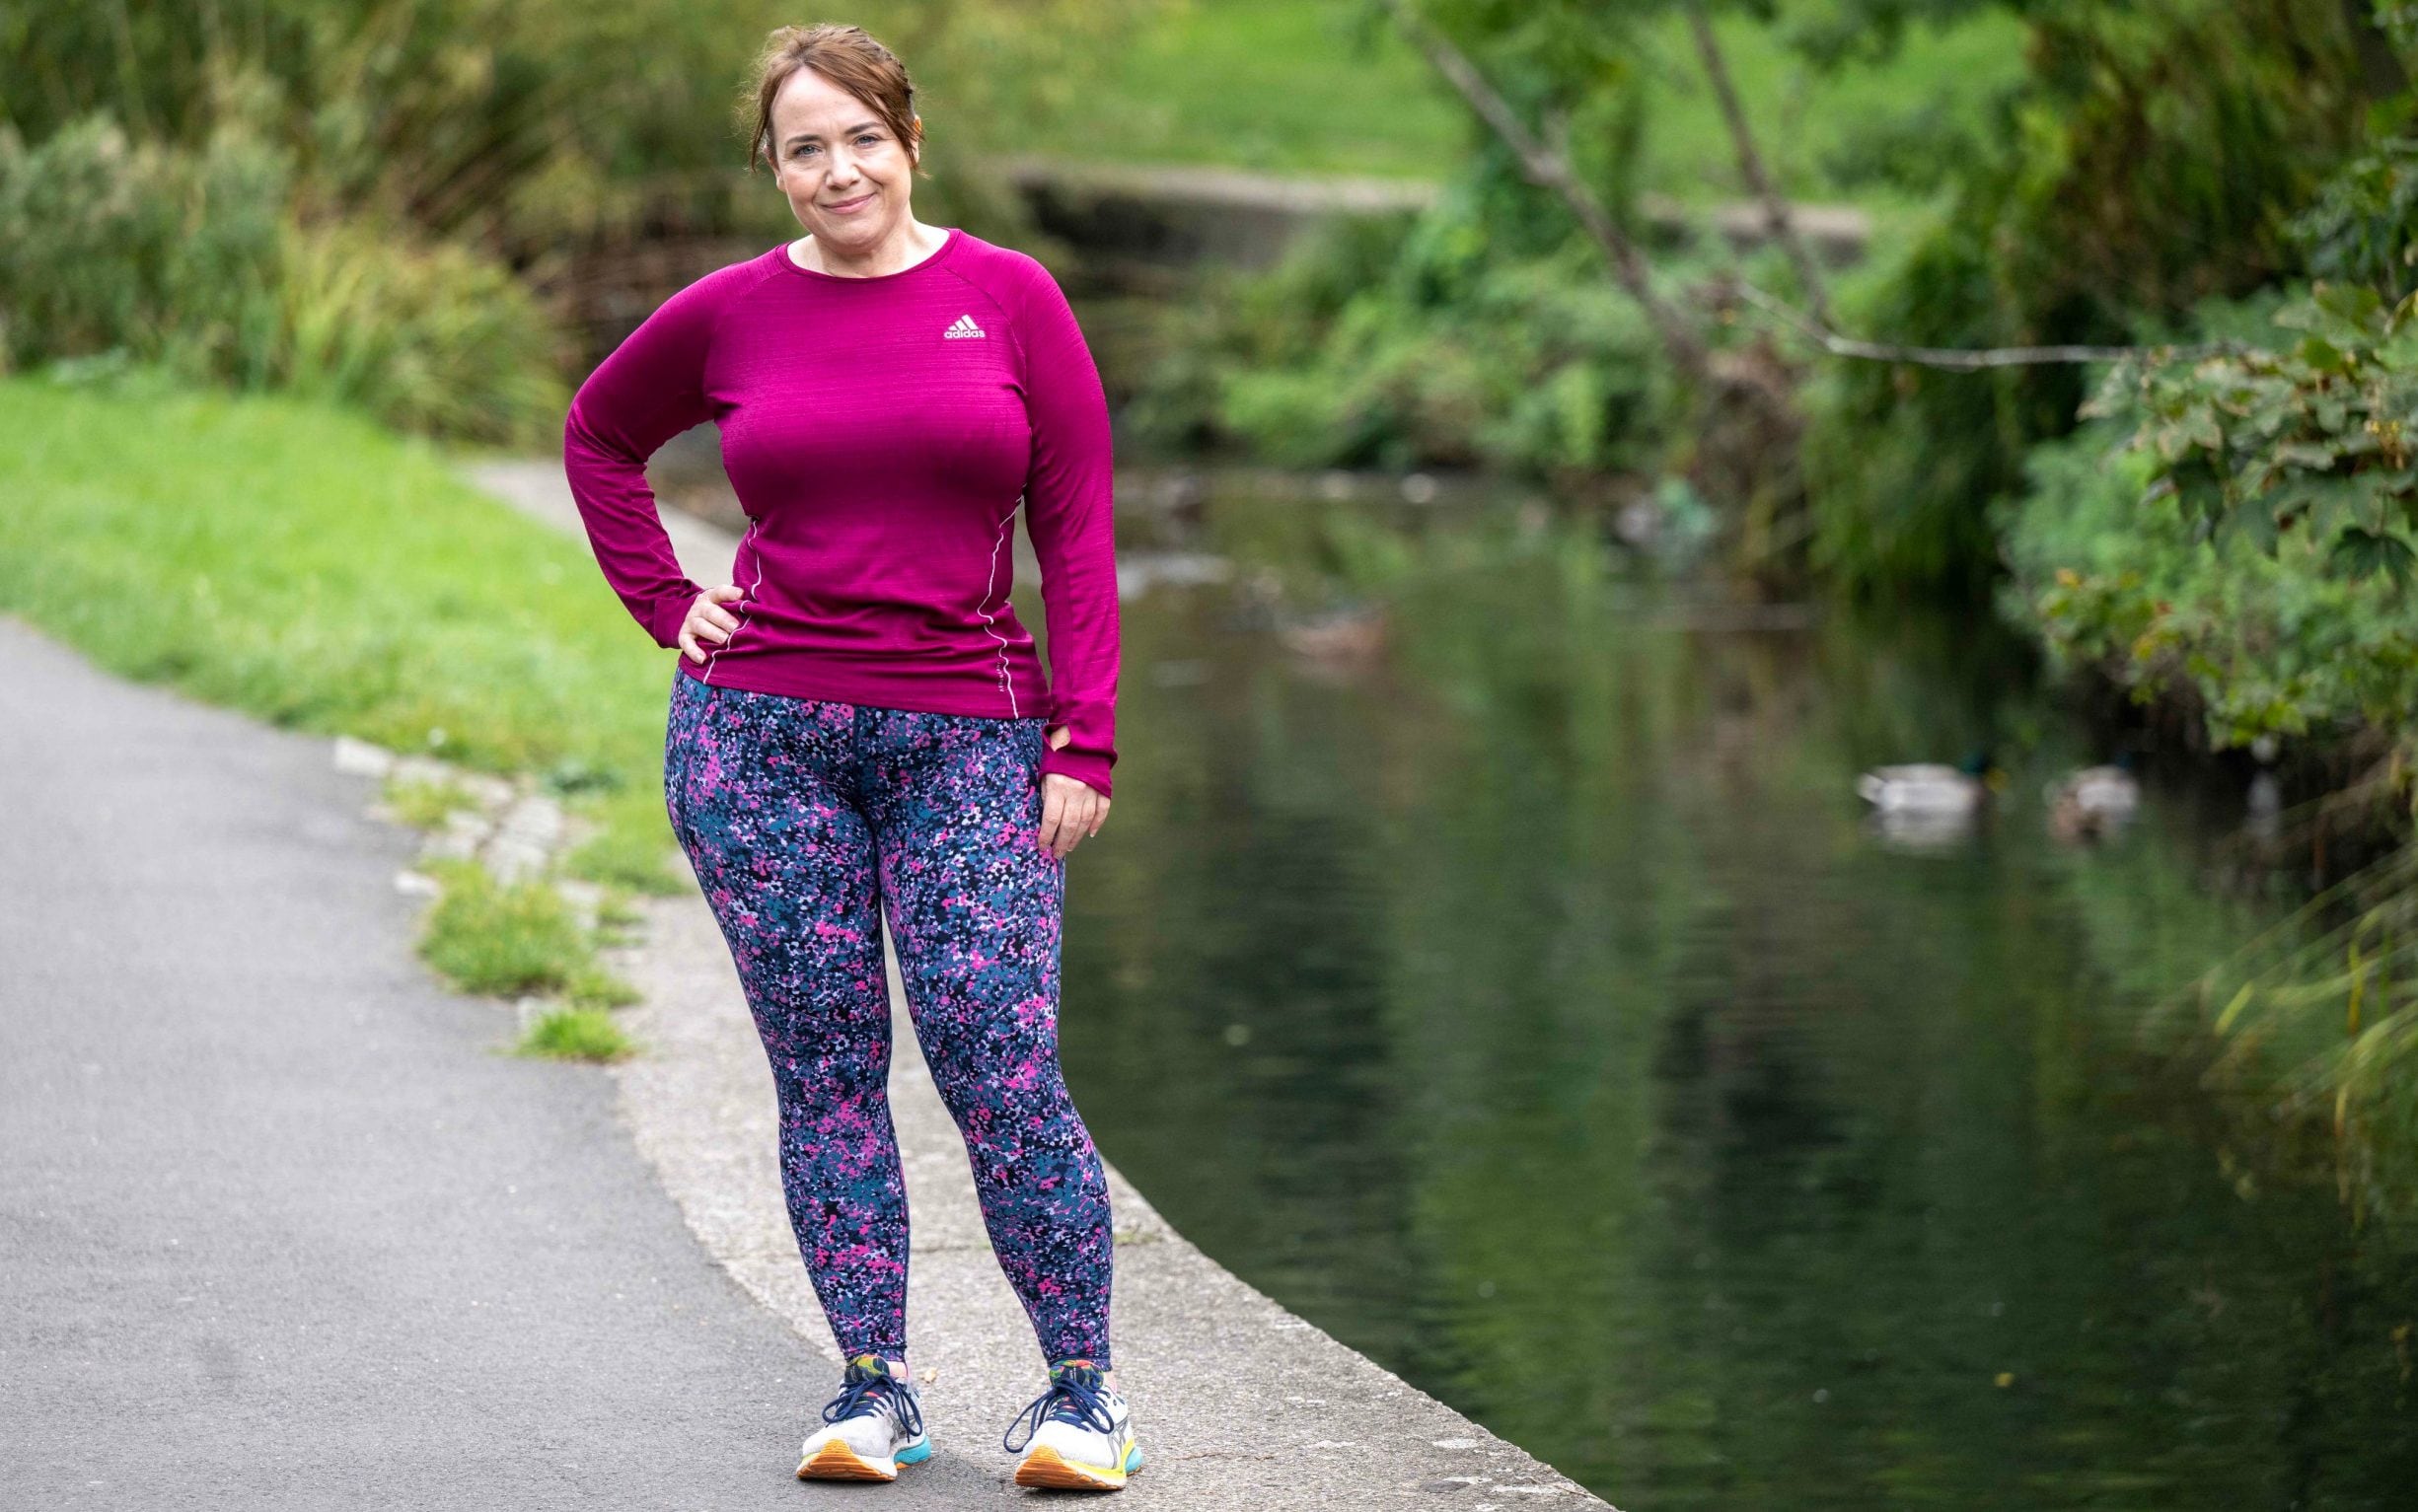 when early menopause hit, i knew i couldn’t only rely on hrt – so i turned to exercise